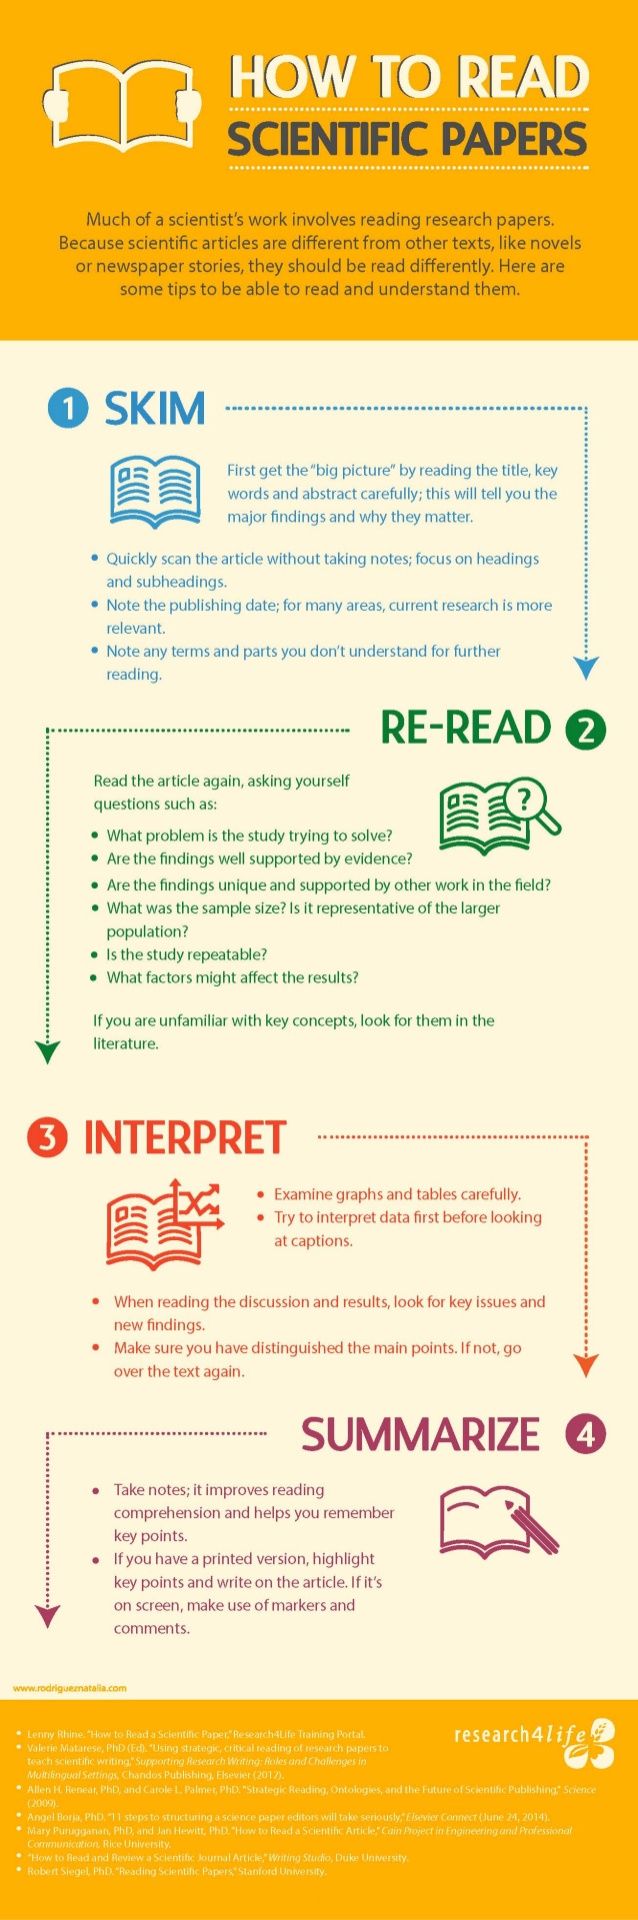 Infographic: How to read a scientific paper